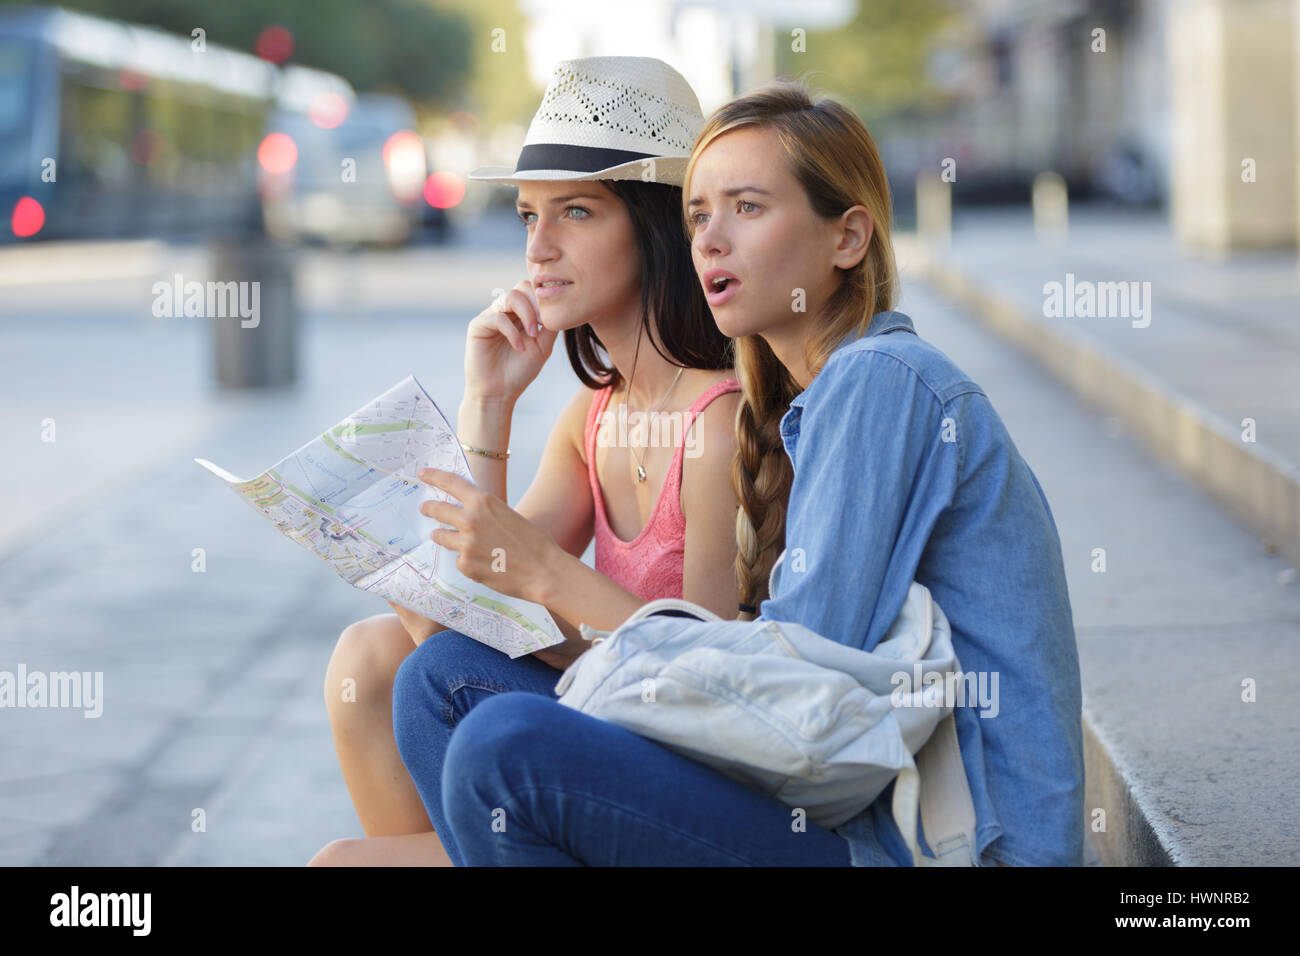 lost and confused girl friends looking for directions on map Stock Photo